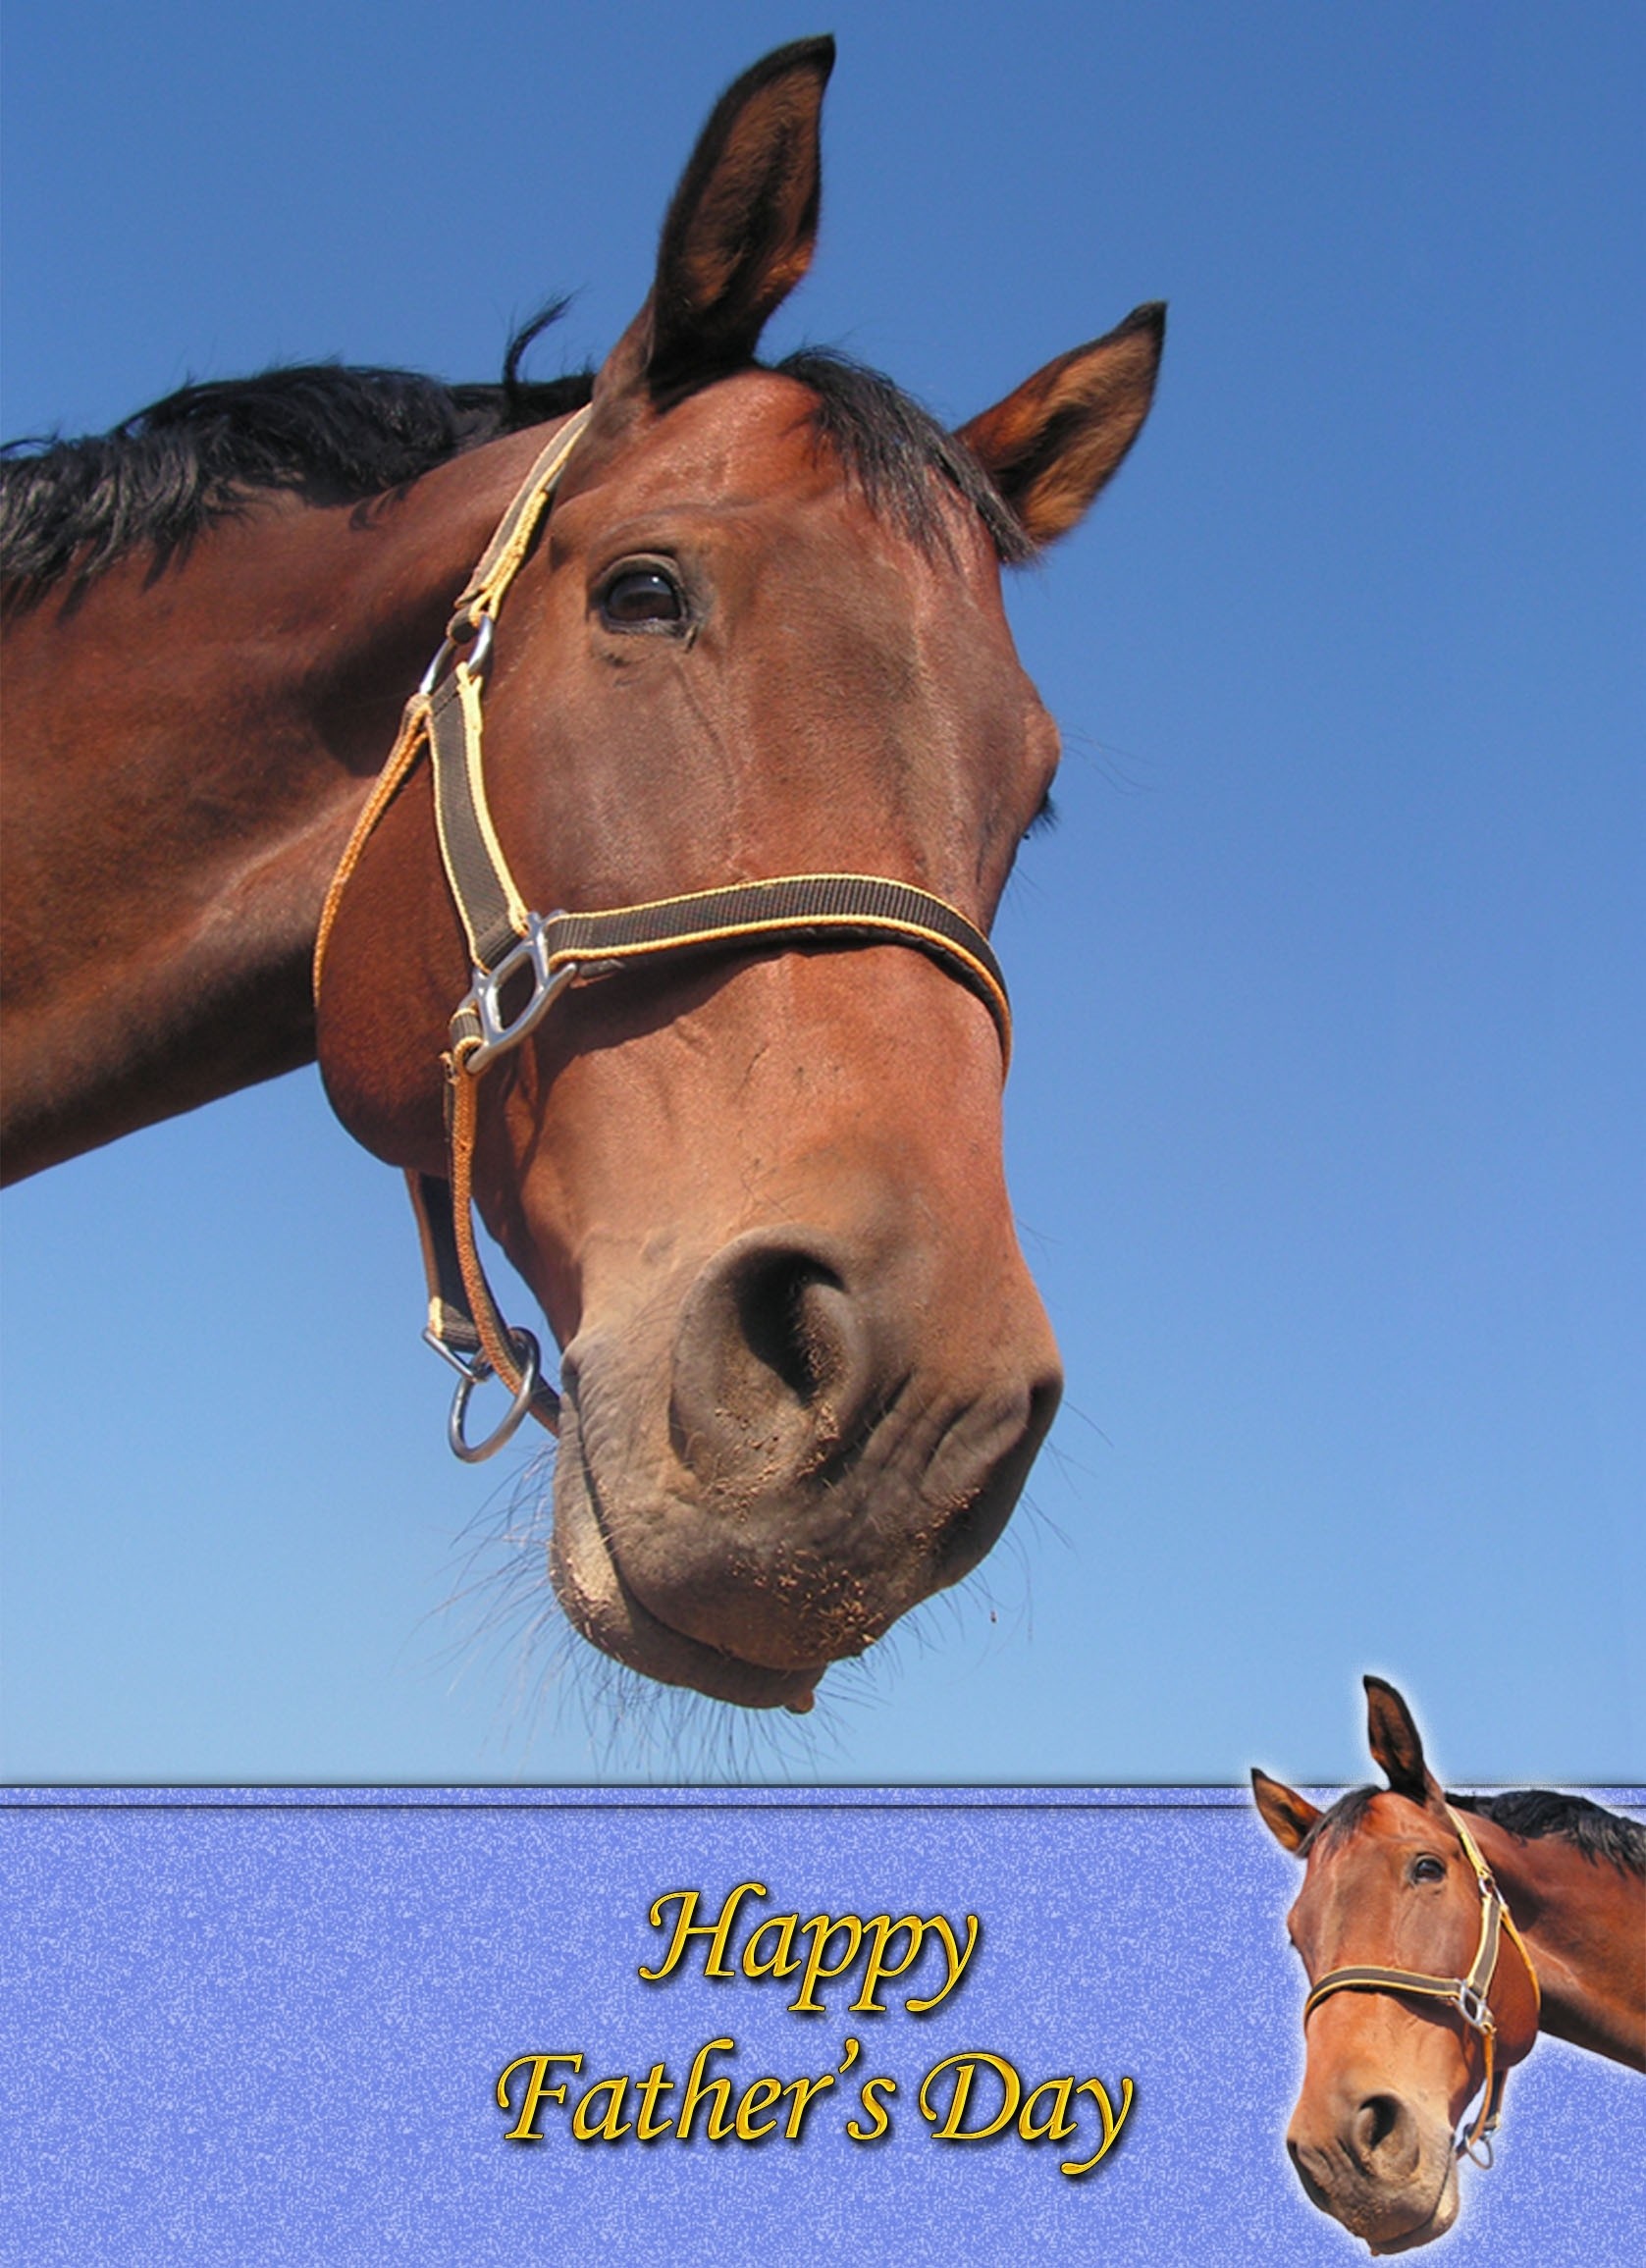 Horse Father's Day Card